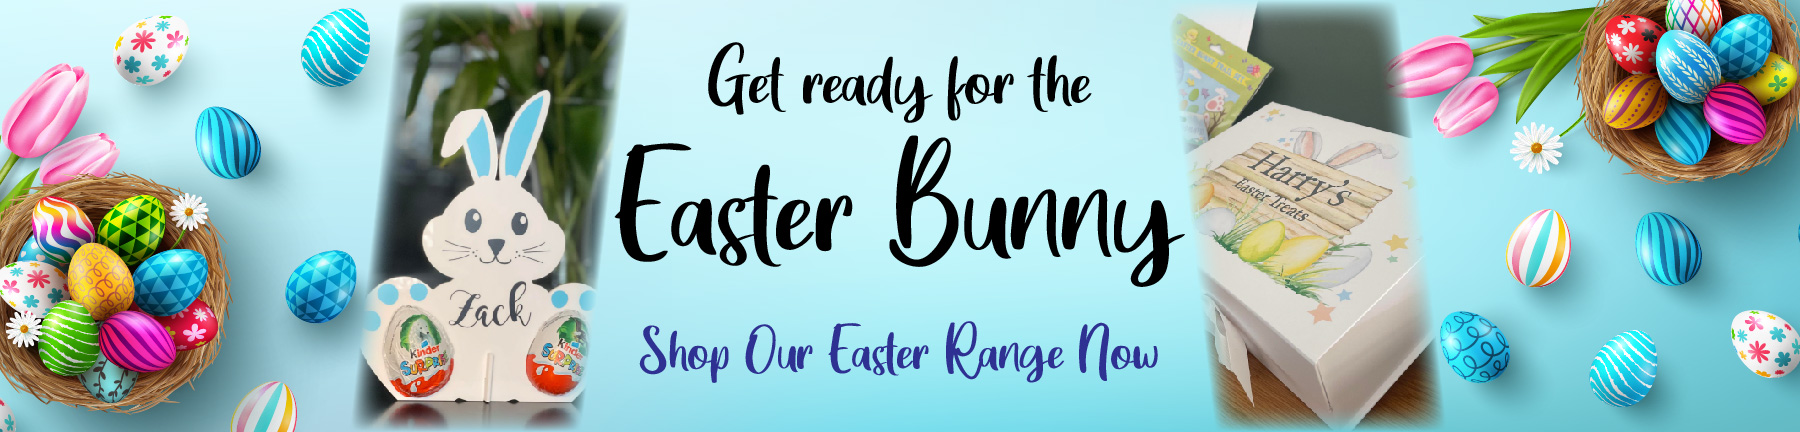 Easter Gifts Banner